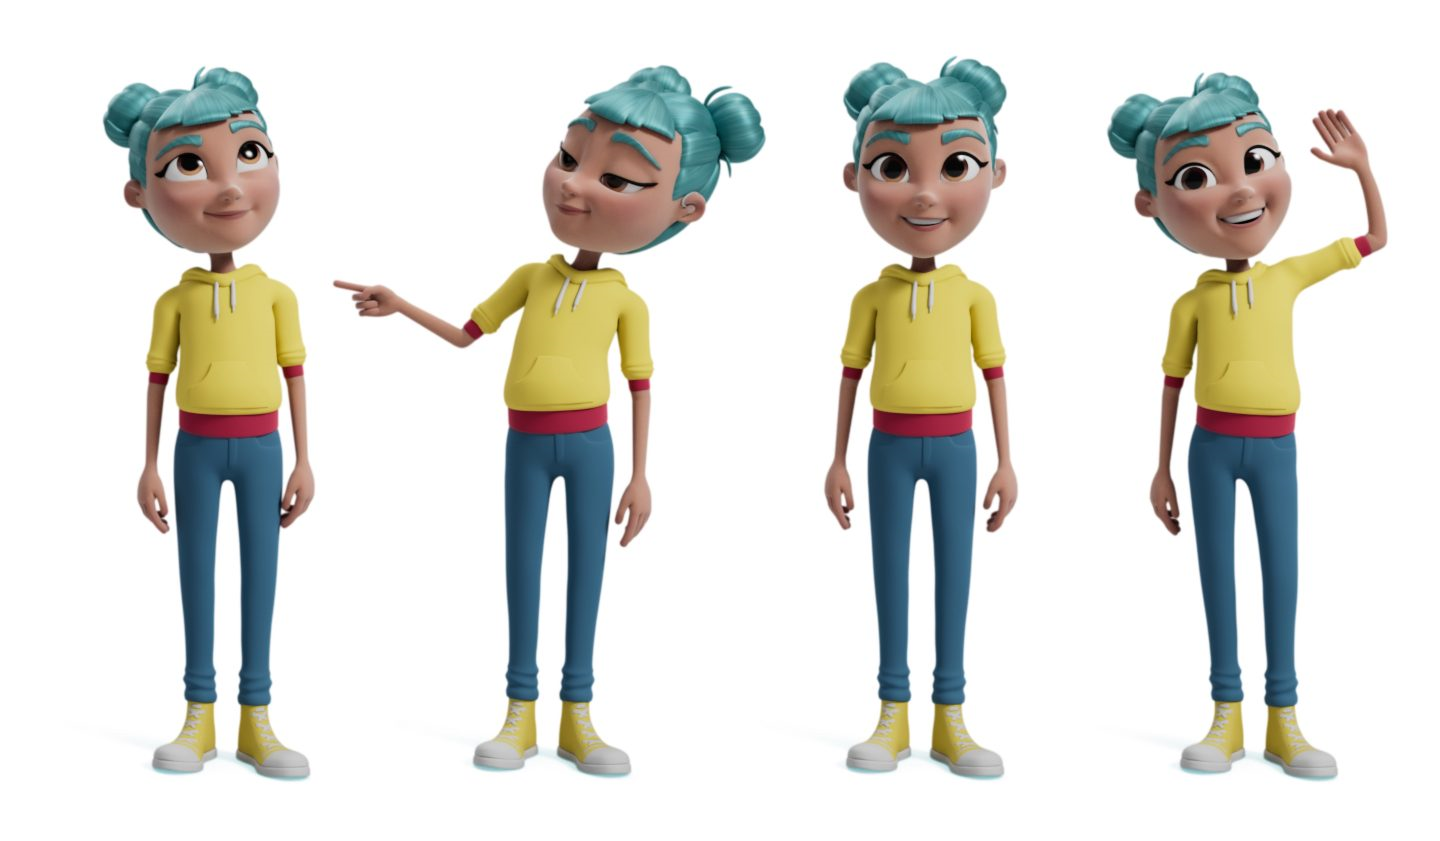 Star, the main character in the StorySign app, in four different poses